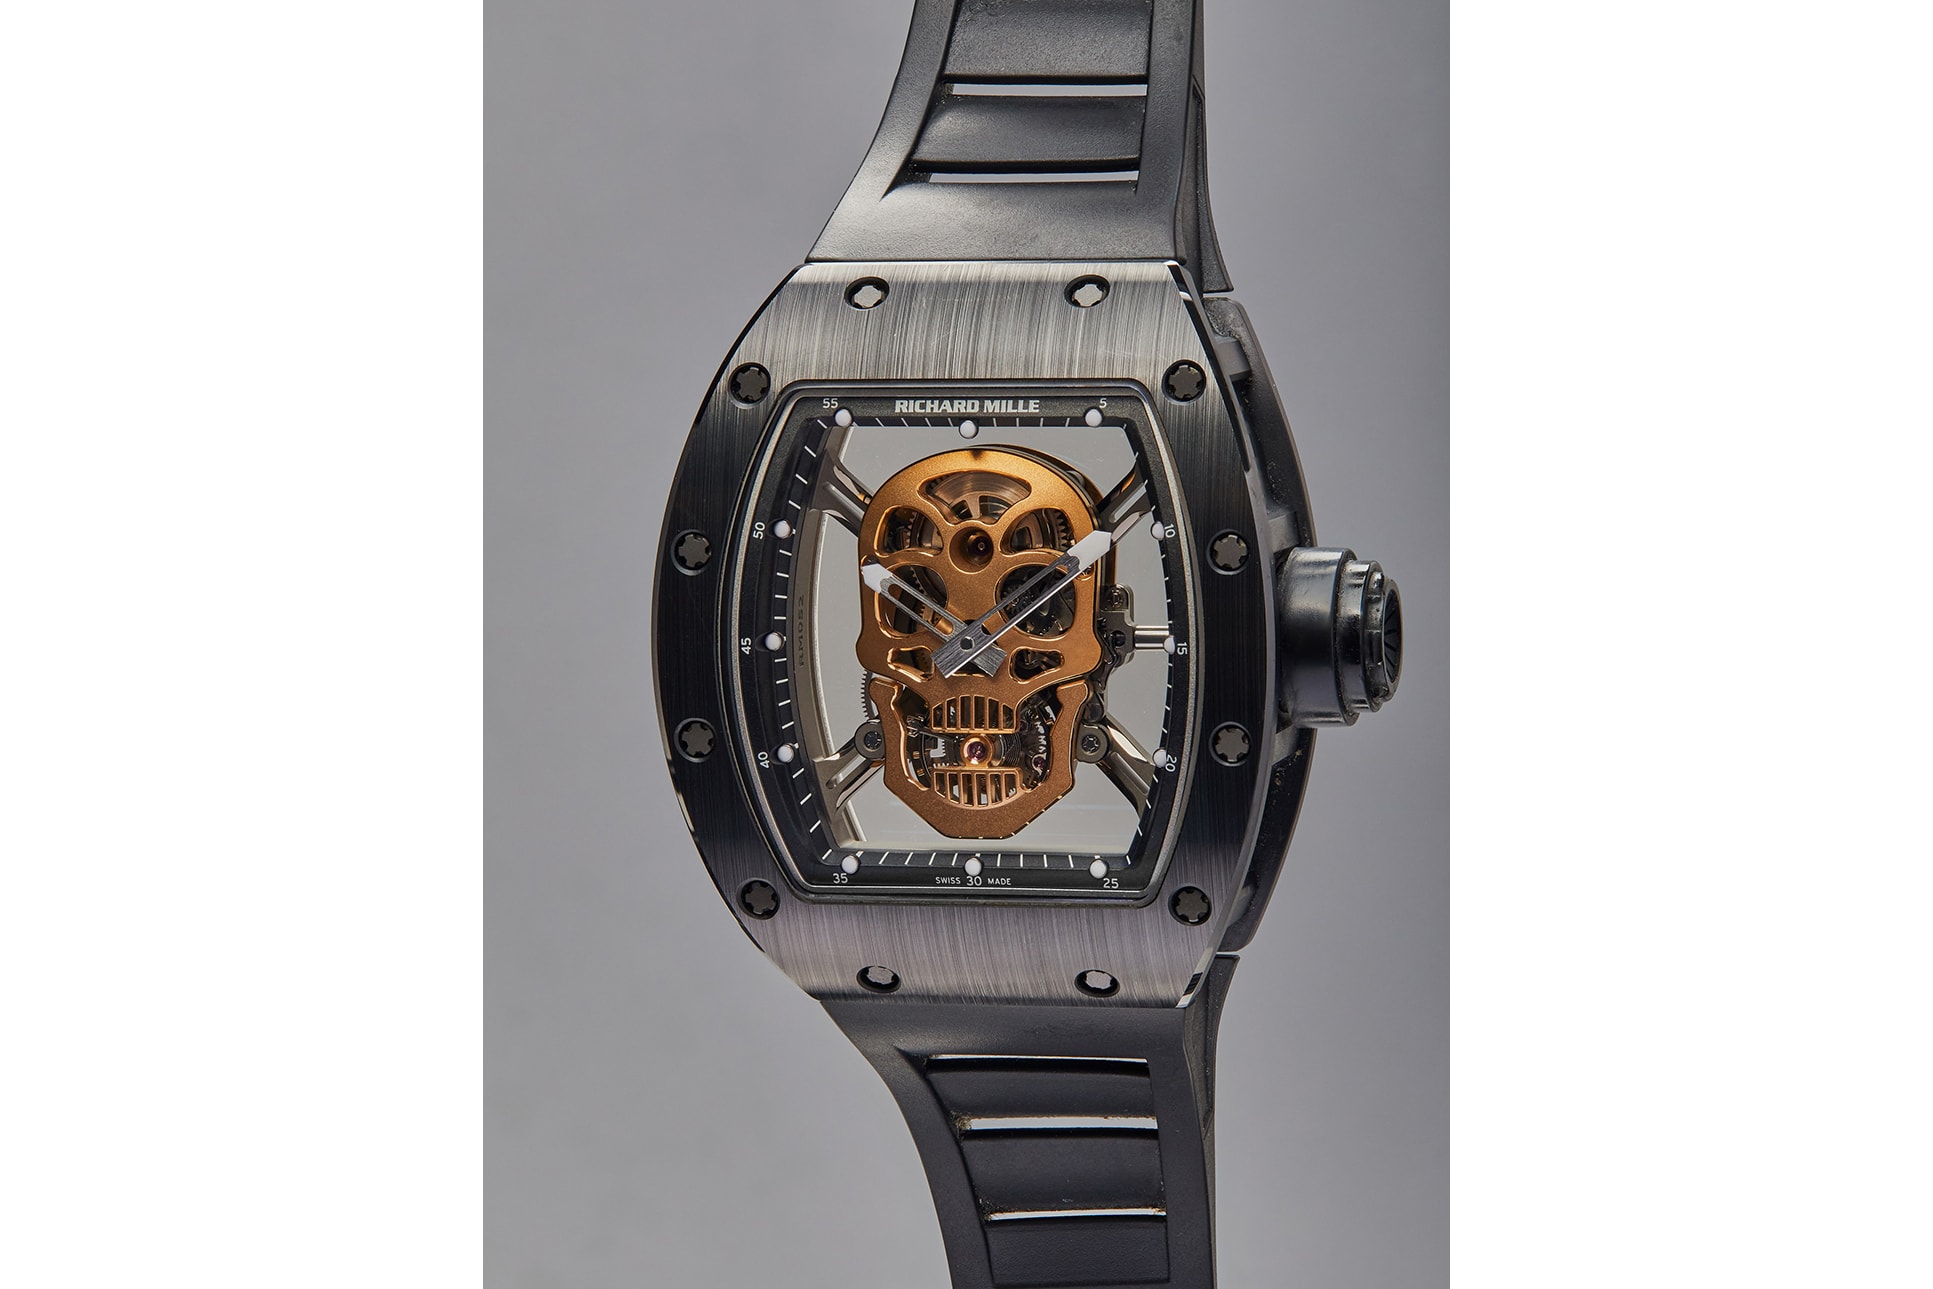 Phillips Bacs & Russo Sylvester Stallone Personal Collection Watch Auction LAB-ID PAM1700 info auctions rambo expendables 3 yohan blake Richard Mille panerai daylight RACING PULSE New York